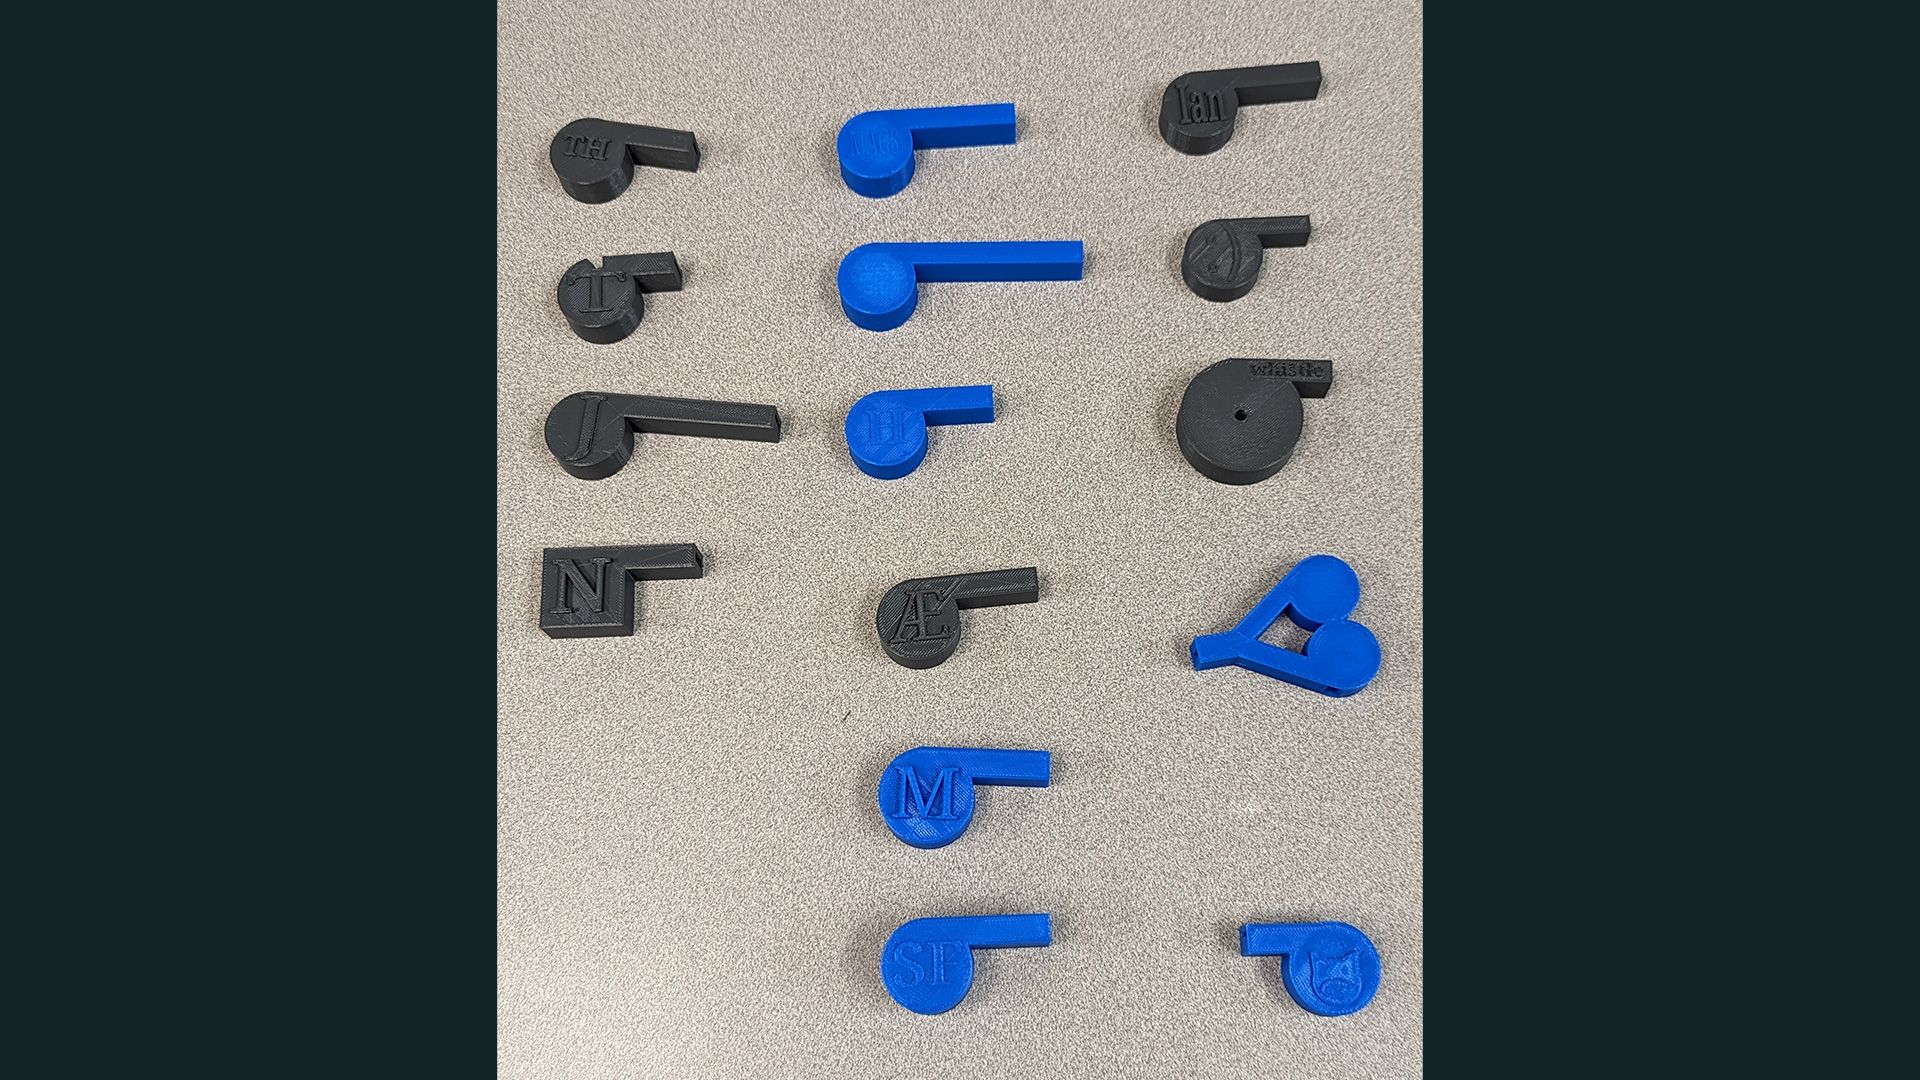 15 3D printed whistles, all varying in design.